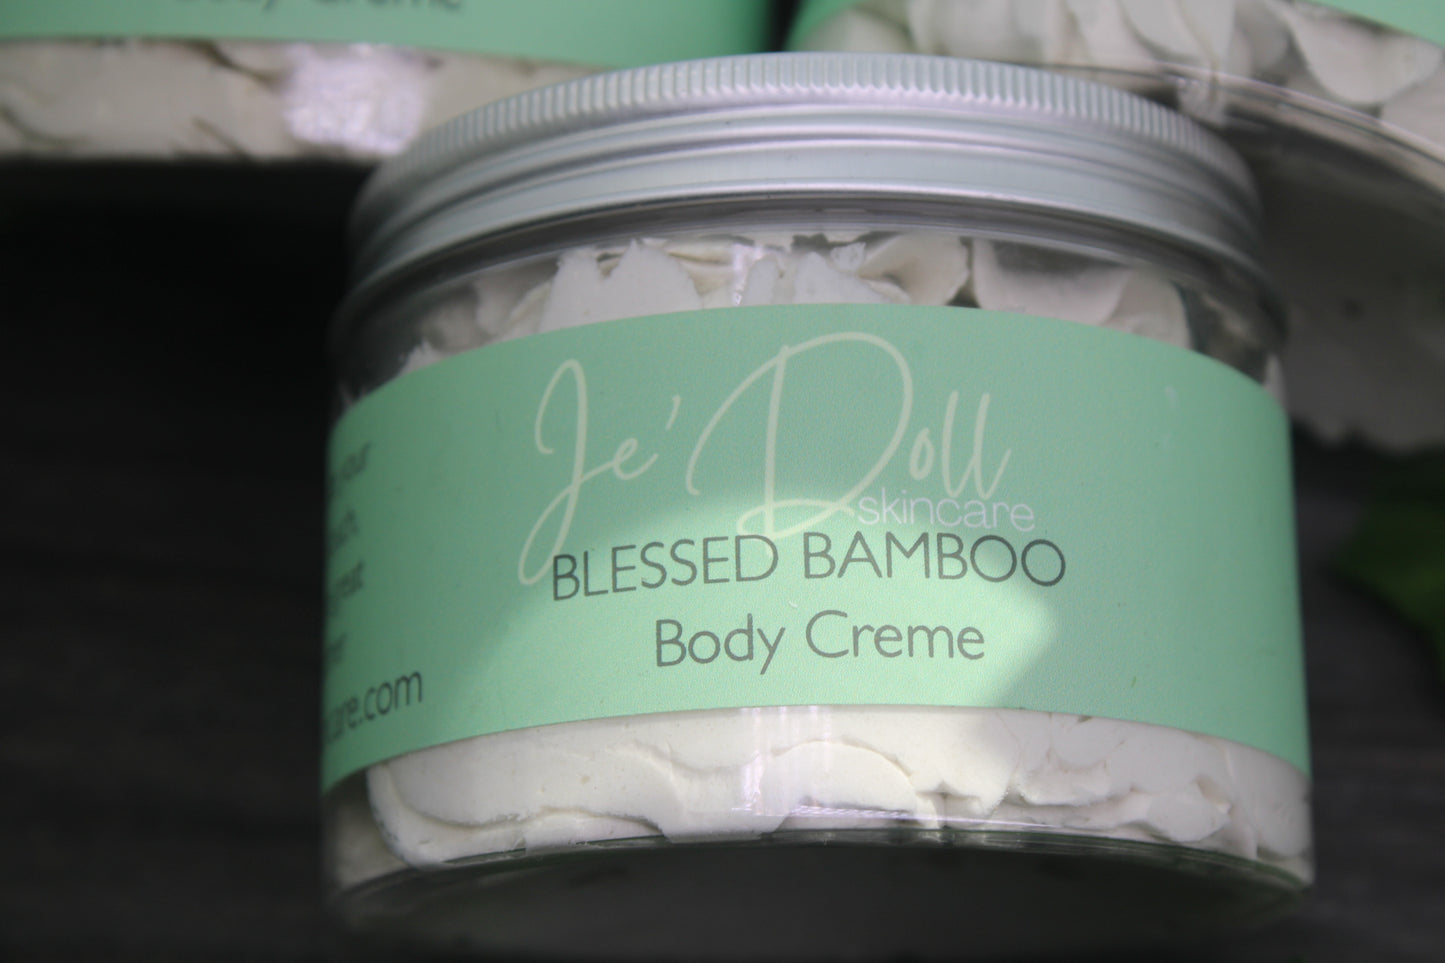 BLESSED BAMBOO BODY CREME